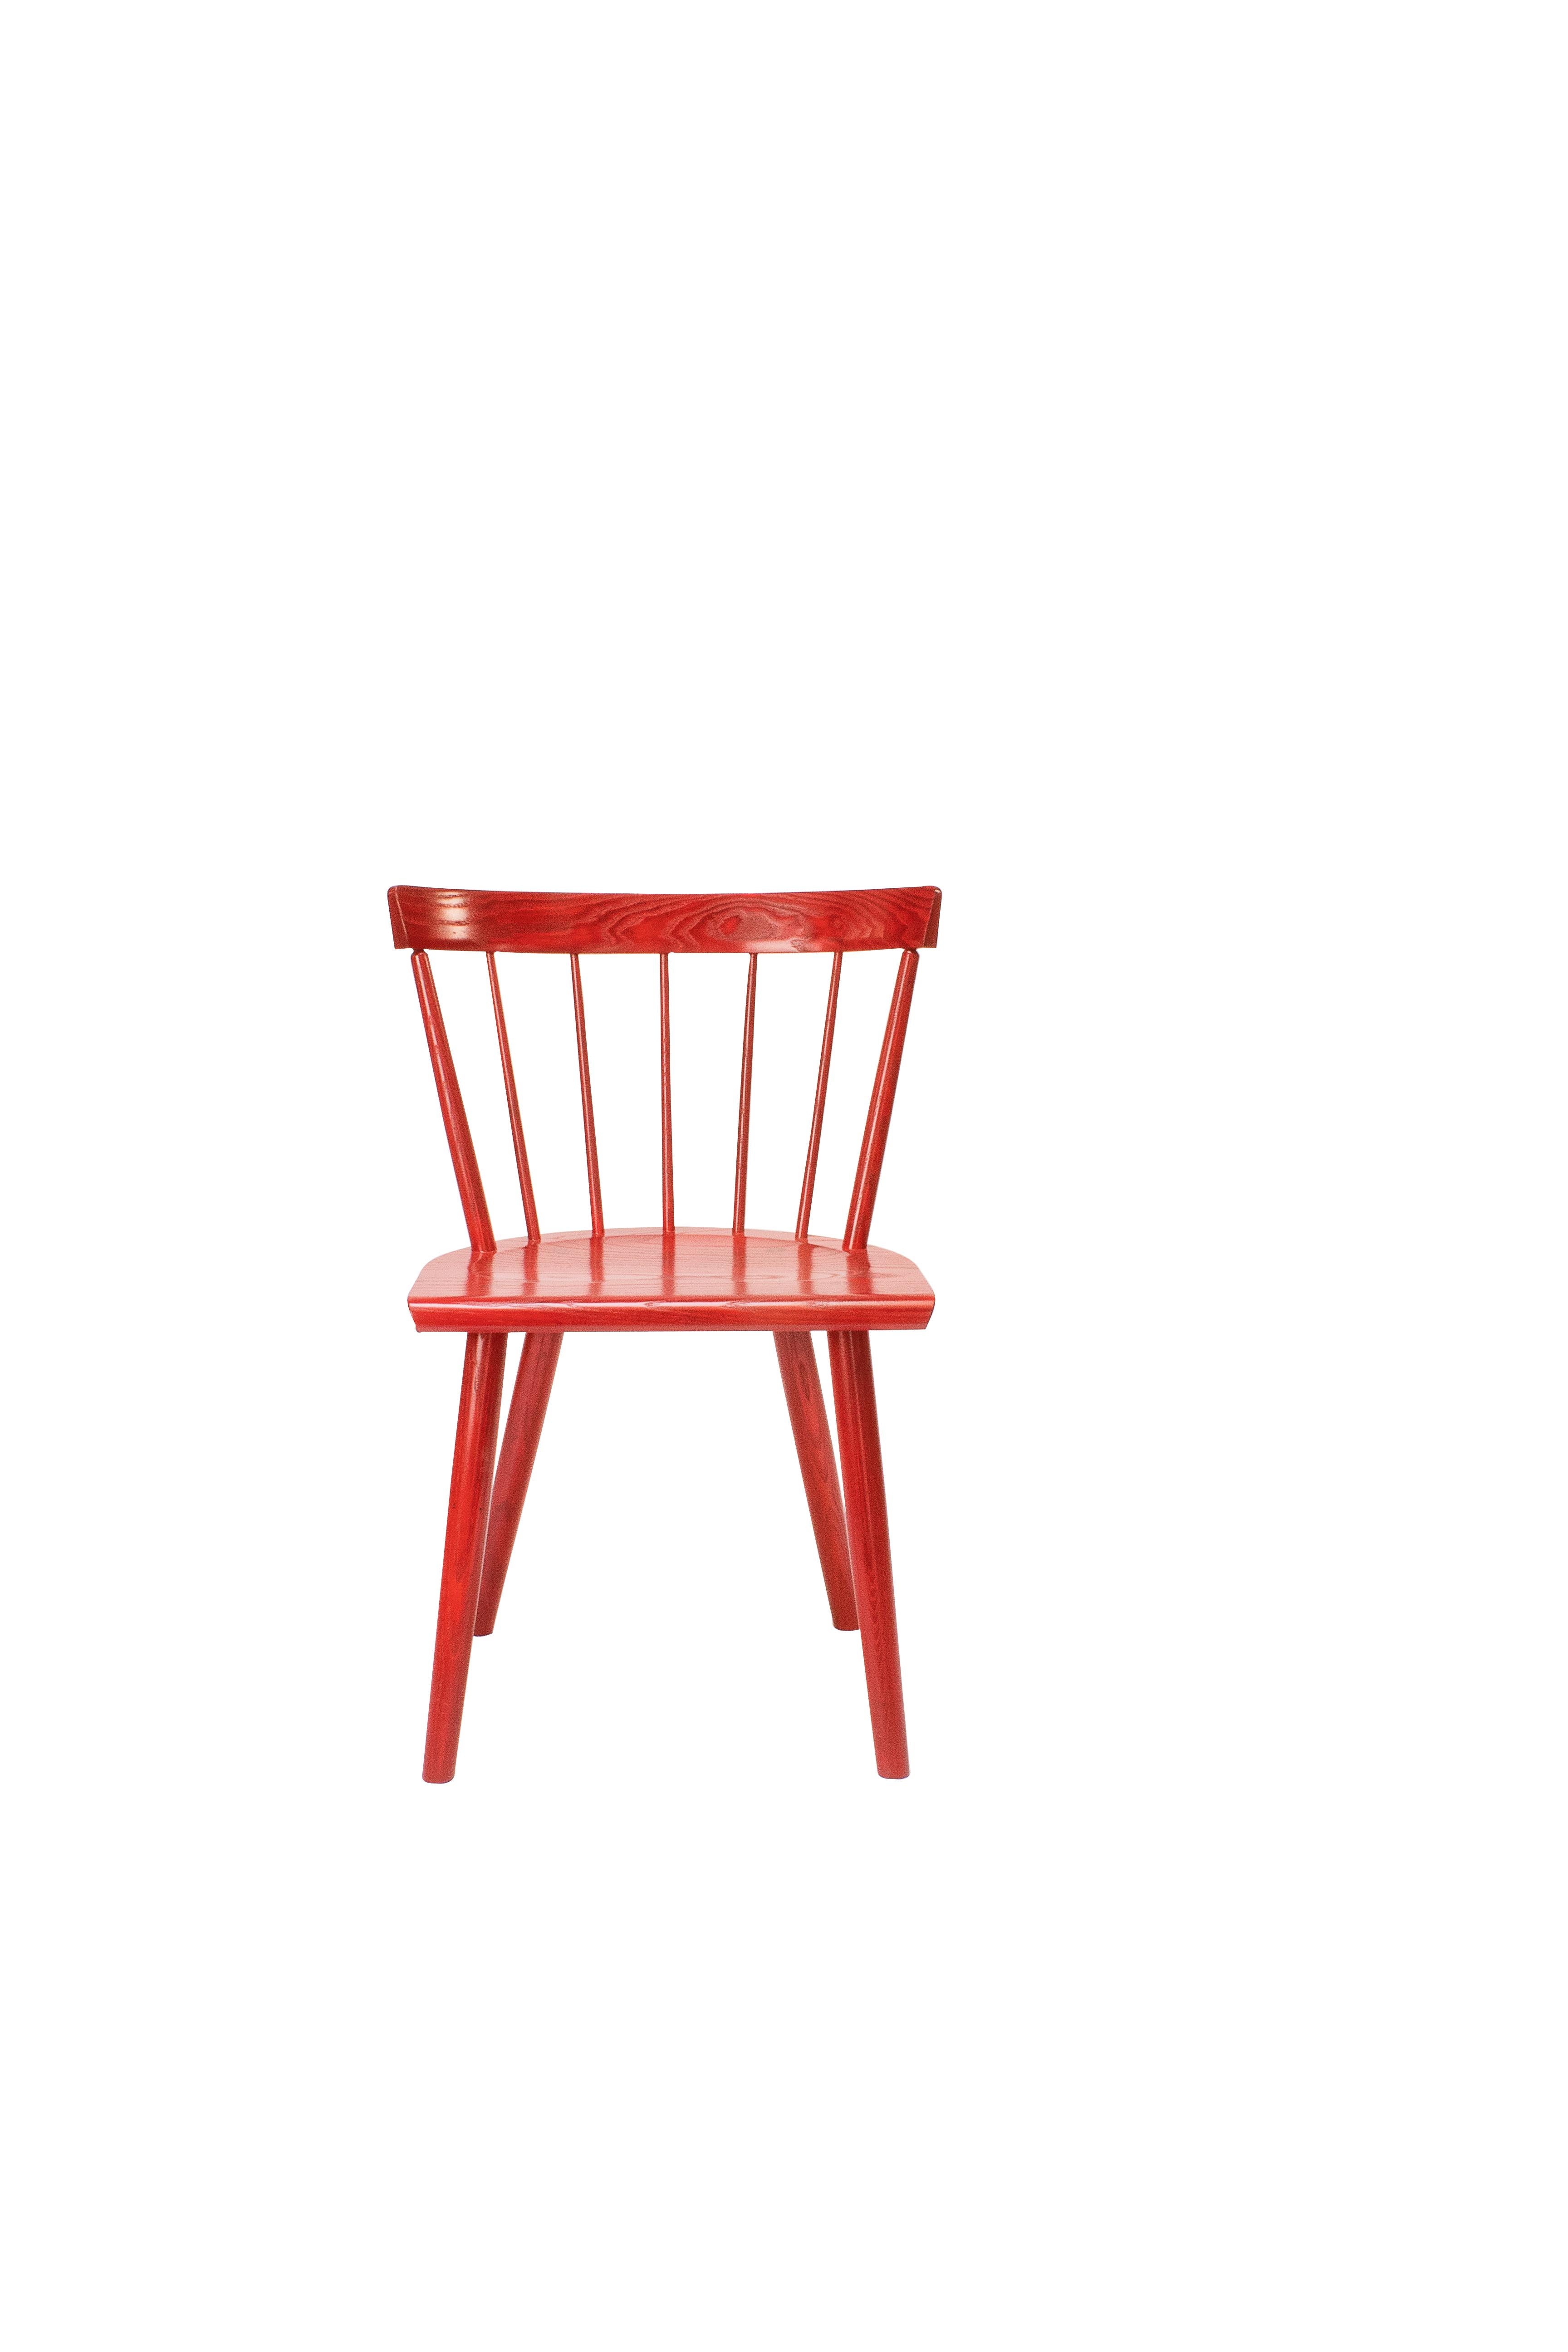 The Colt lowback side chair by O&G Studio is an iconic Modern Windsor chair, perfect in proportions, detail and comfort. The Colt Low Back is handmade in our Warren Rhode Island Studio from solid North American hardwood using time honored joinery